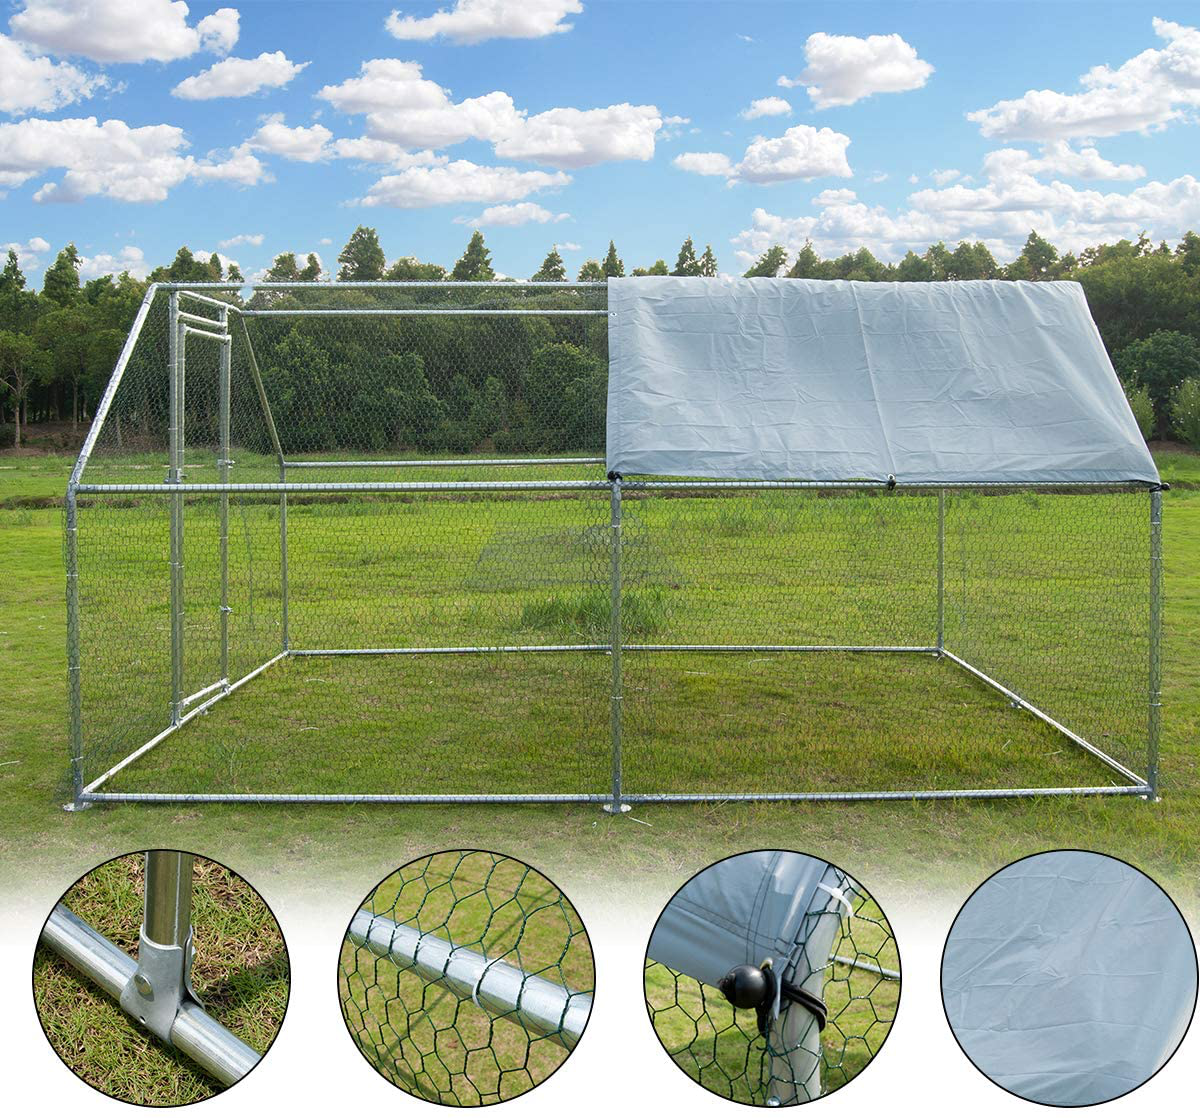 Large Metal Chicken Coop Walk-In Poultry Cage Hen Run House Rabbits Habitat Cage Flat Roofed Cage with Waterproof and Anti-Ultraviolet Cover for Outdoor Backyard Farm Use (9.2' L X 12.5' W X 6.4' H)